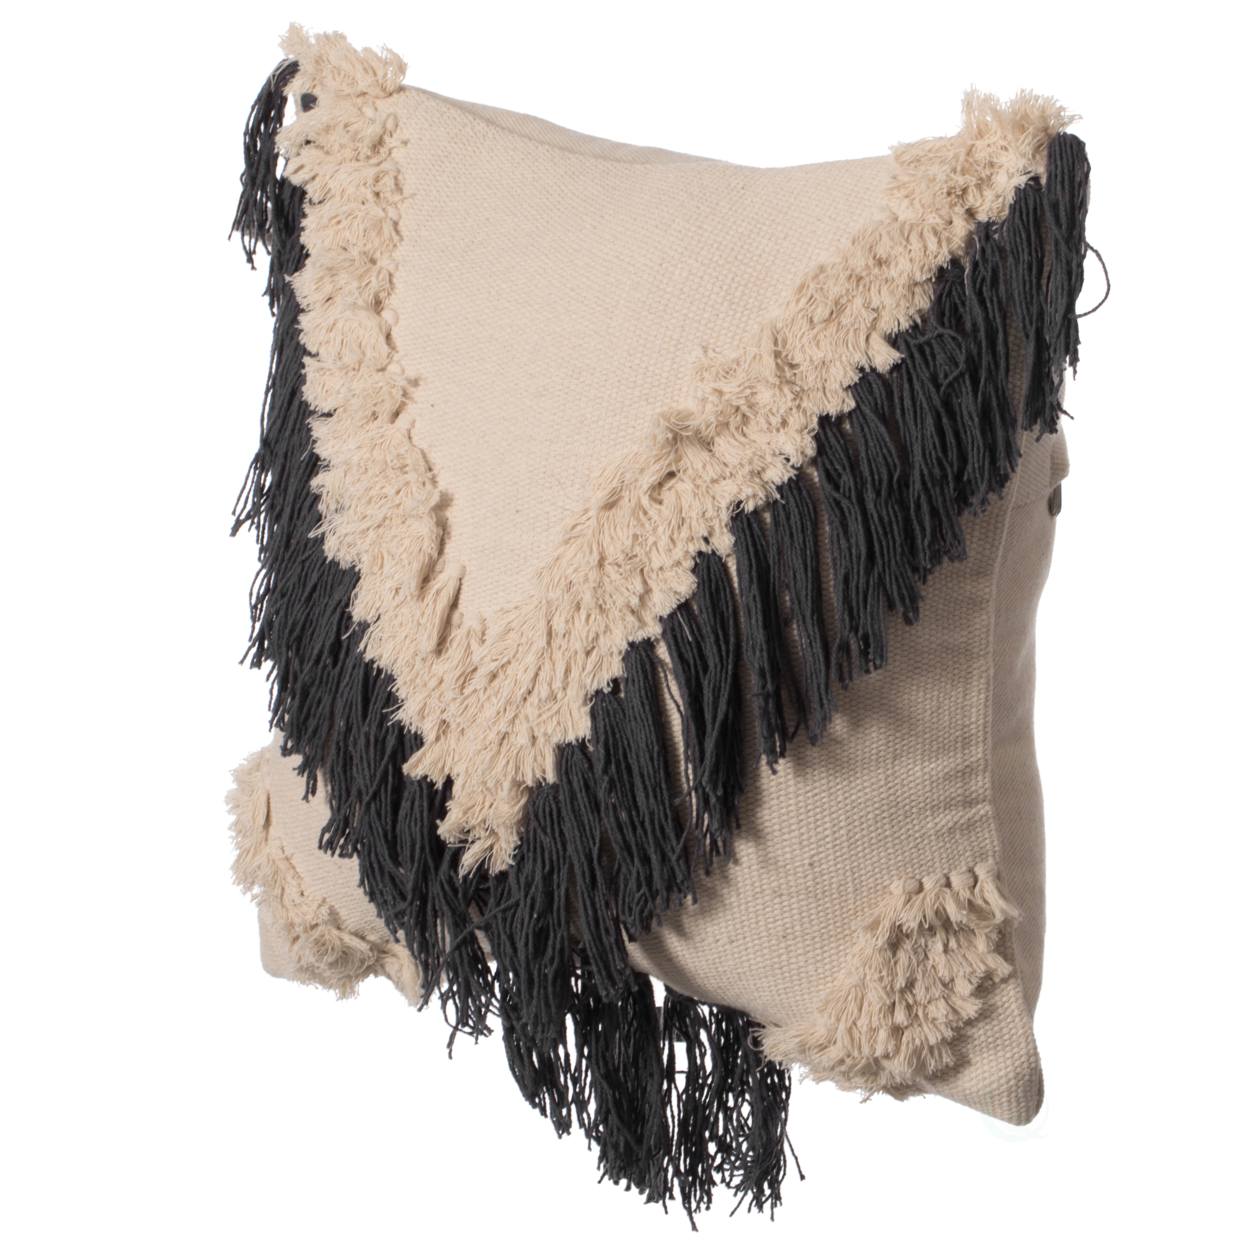 16" Handwoven Cotton Throw Pillow Cover with Embossed and Fringed Crossed line - charcoal with cushion